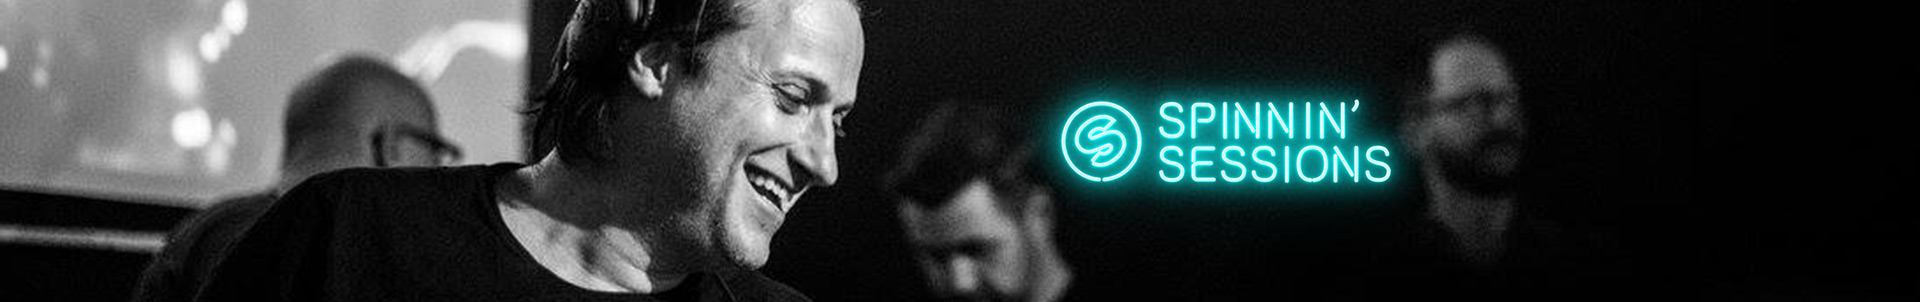 We Rave You Premiere: Spinnin' Sessions radio show with a Guest Mix by EDX